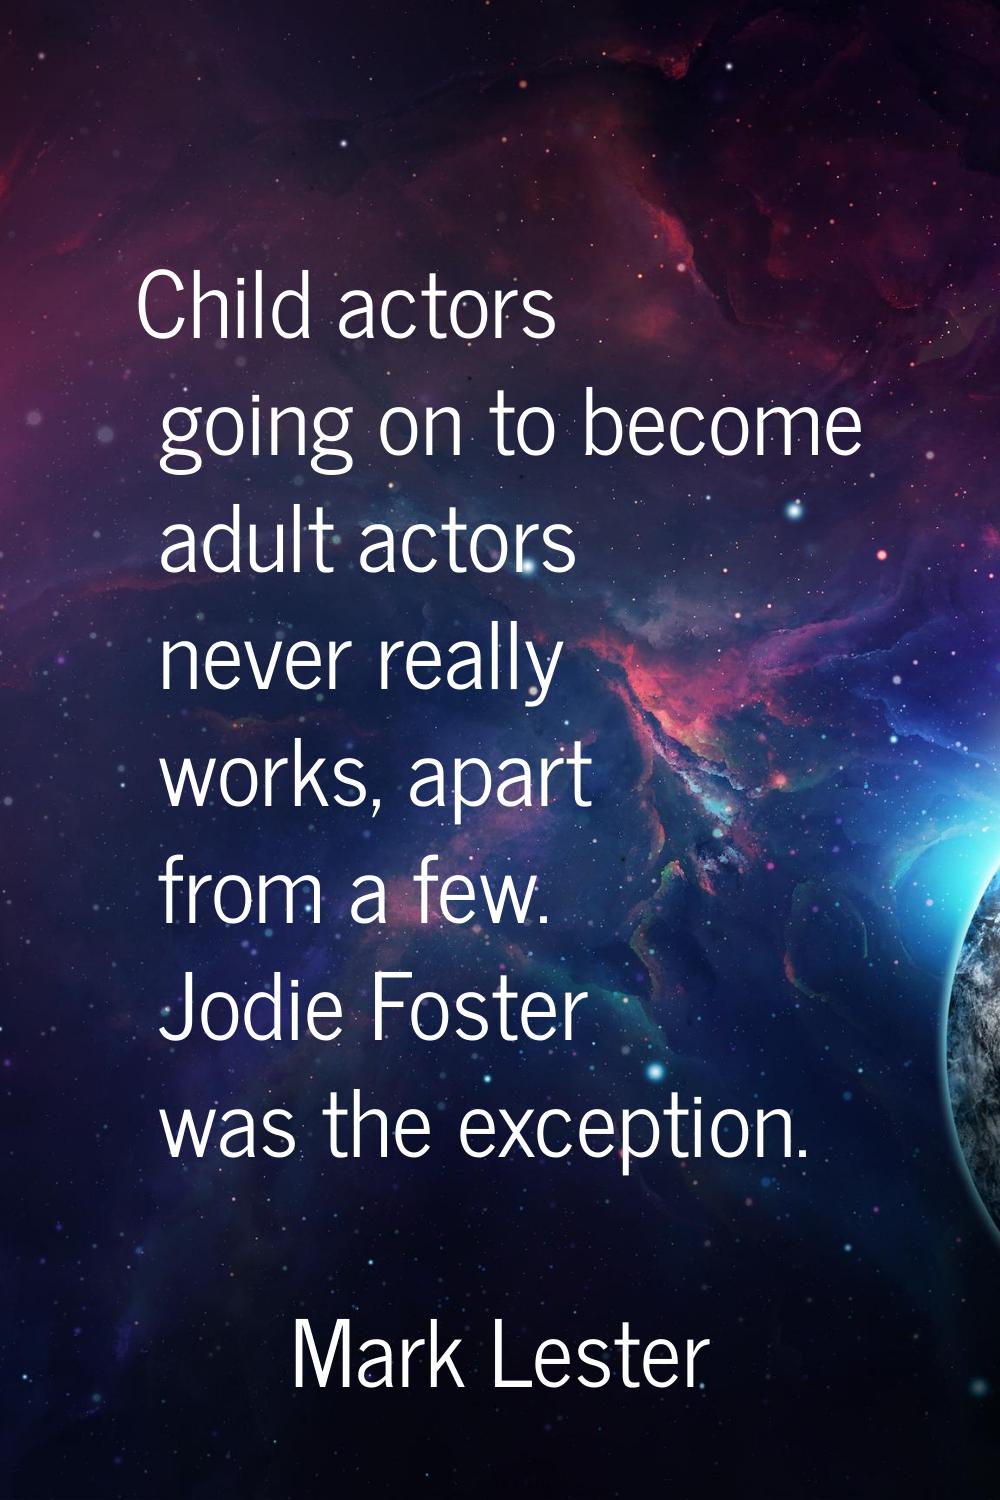 Child actors going on to become adult actors never really works, apart from a few. Jodie Foster was